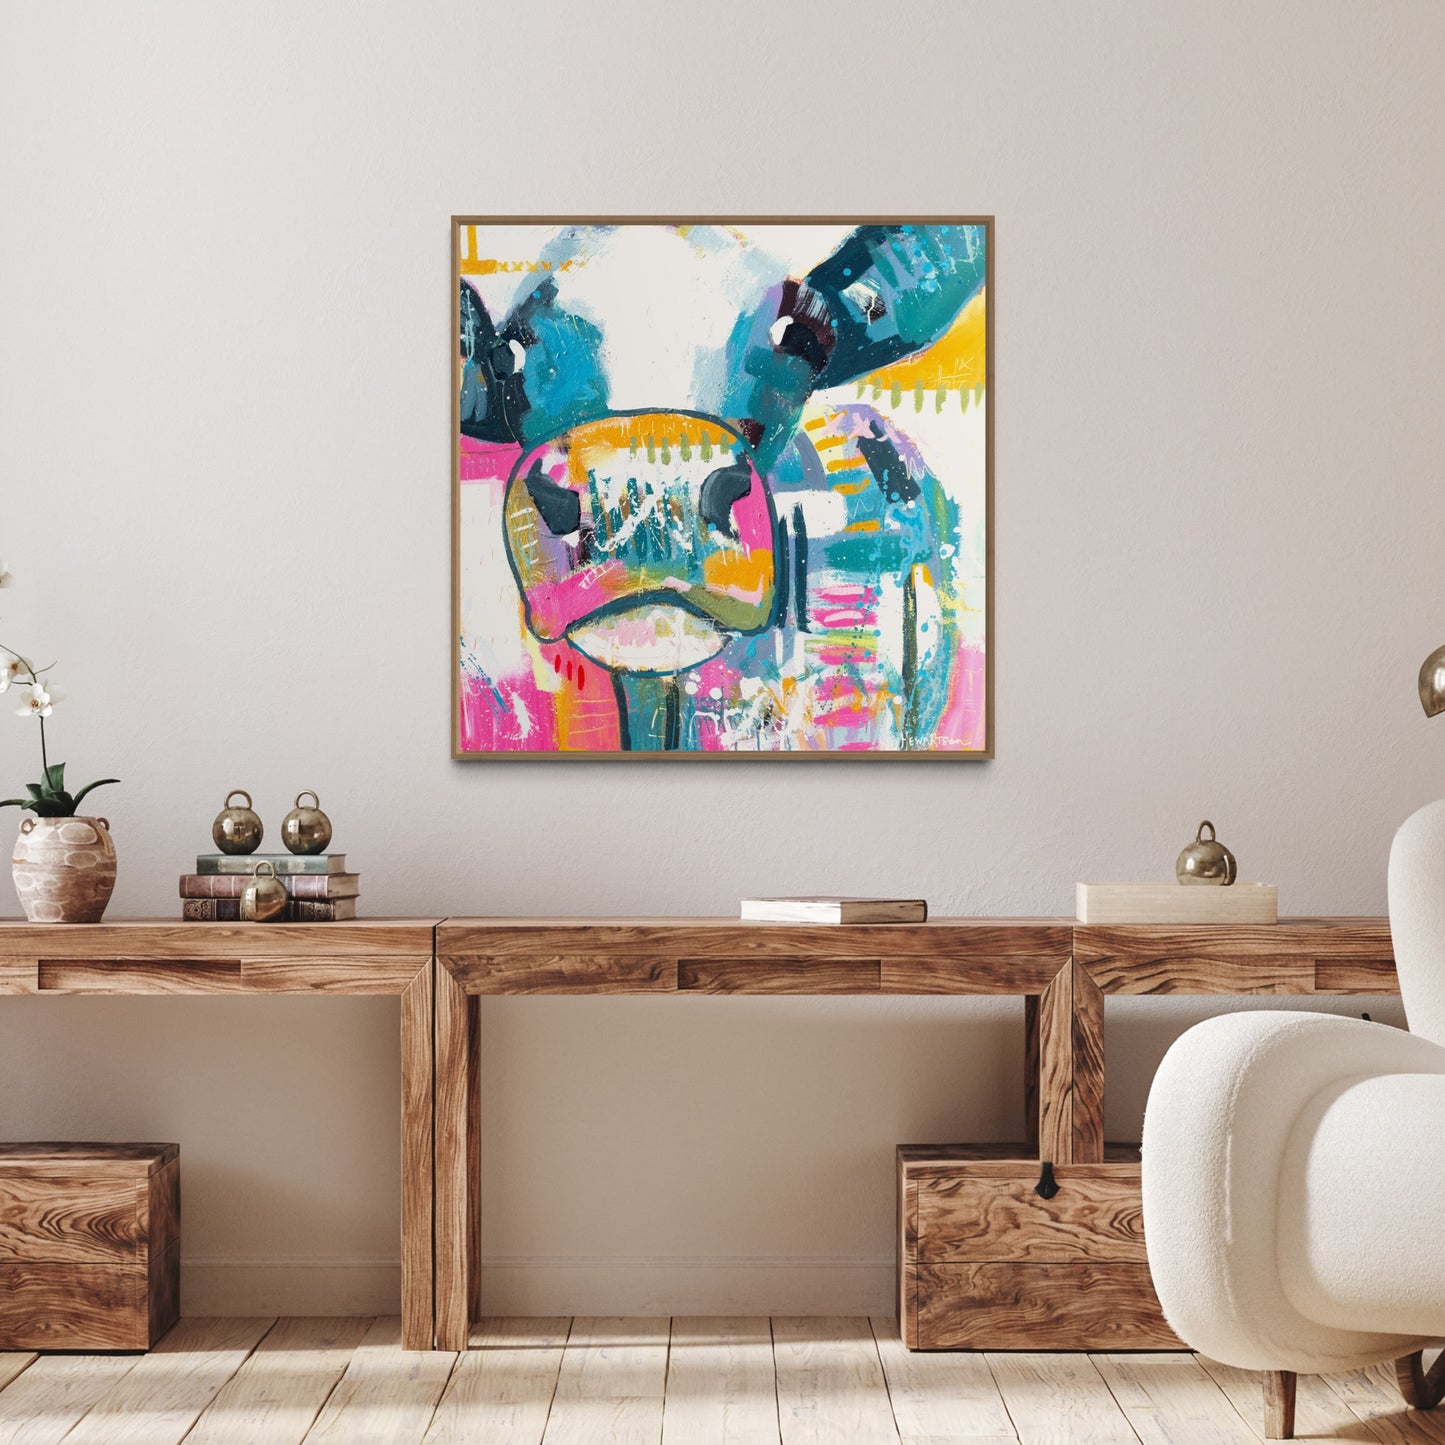 Brewster - Abstract Cow by Australian Artist Rose Hewartson Original Abstract Painting on Canvas Framed 93 x 93cm Statement Piece